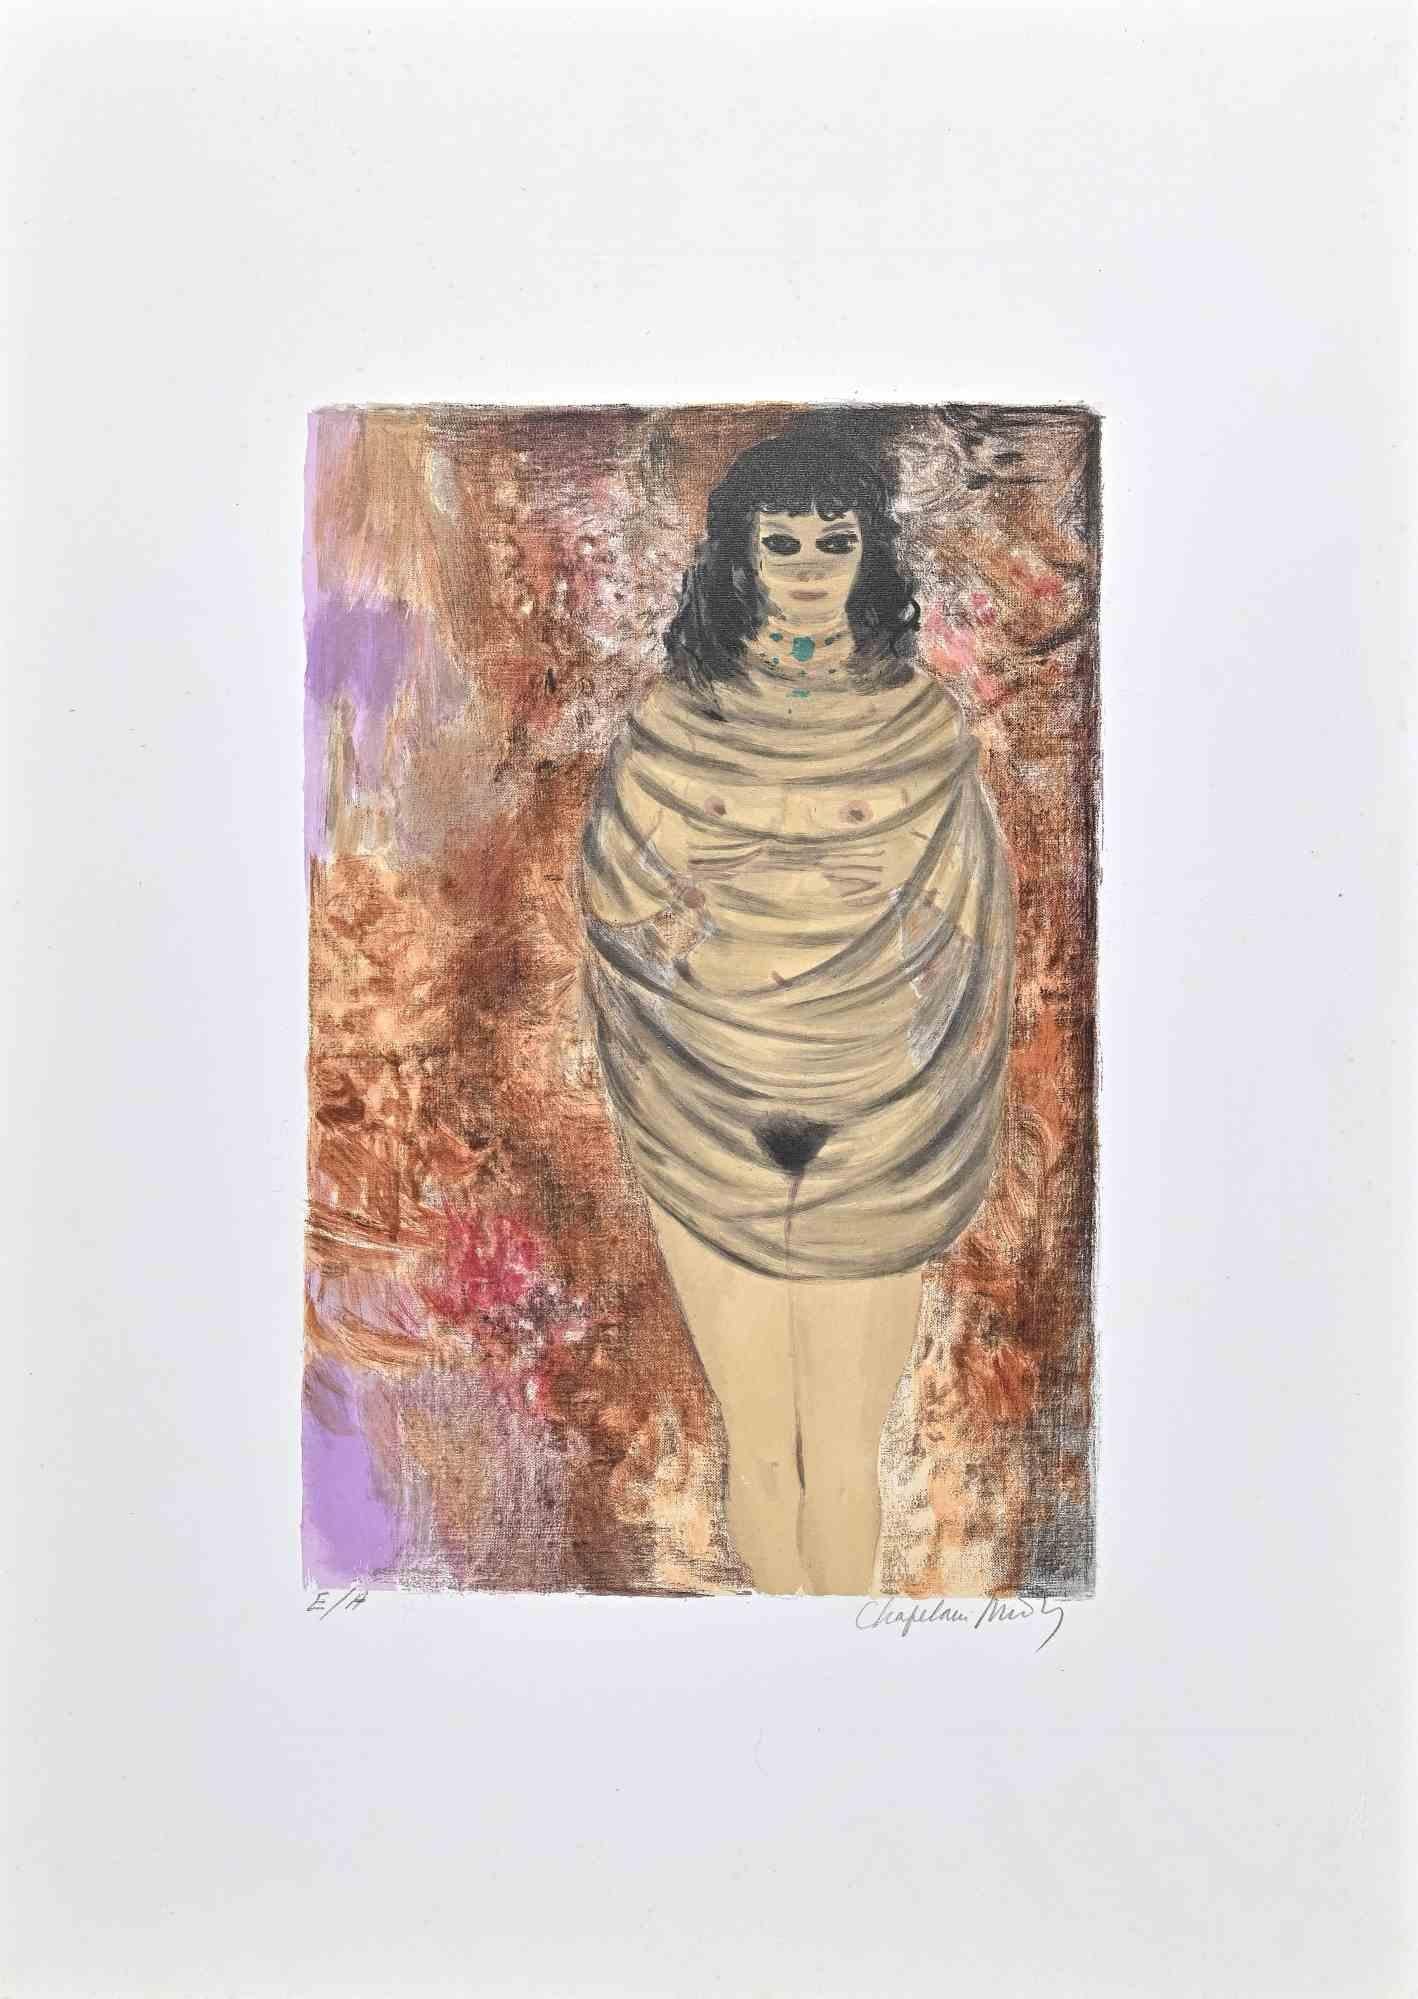 Woman - Original Lithograph by Roger Chapelain-Midy - 1977